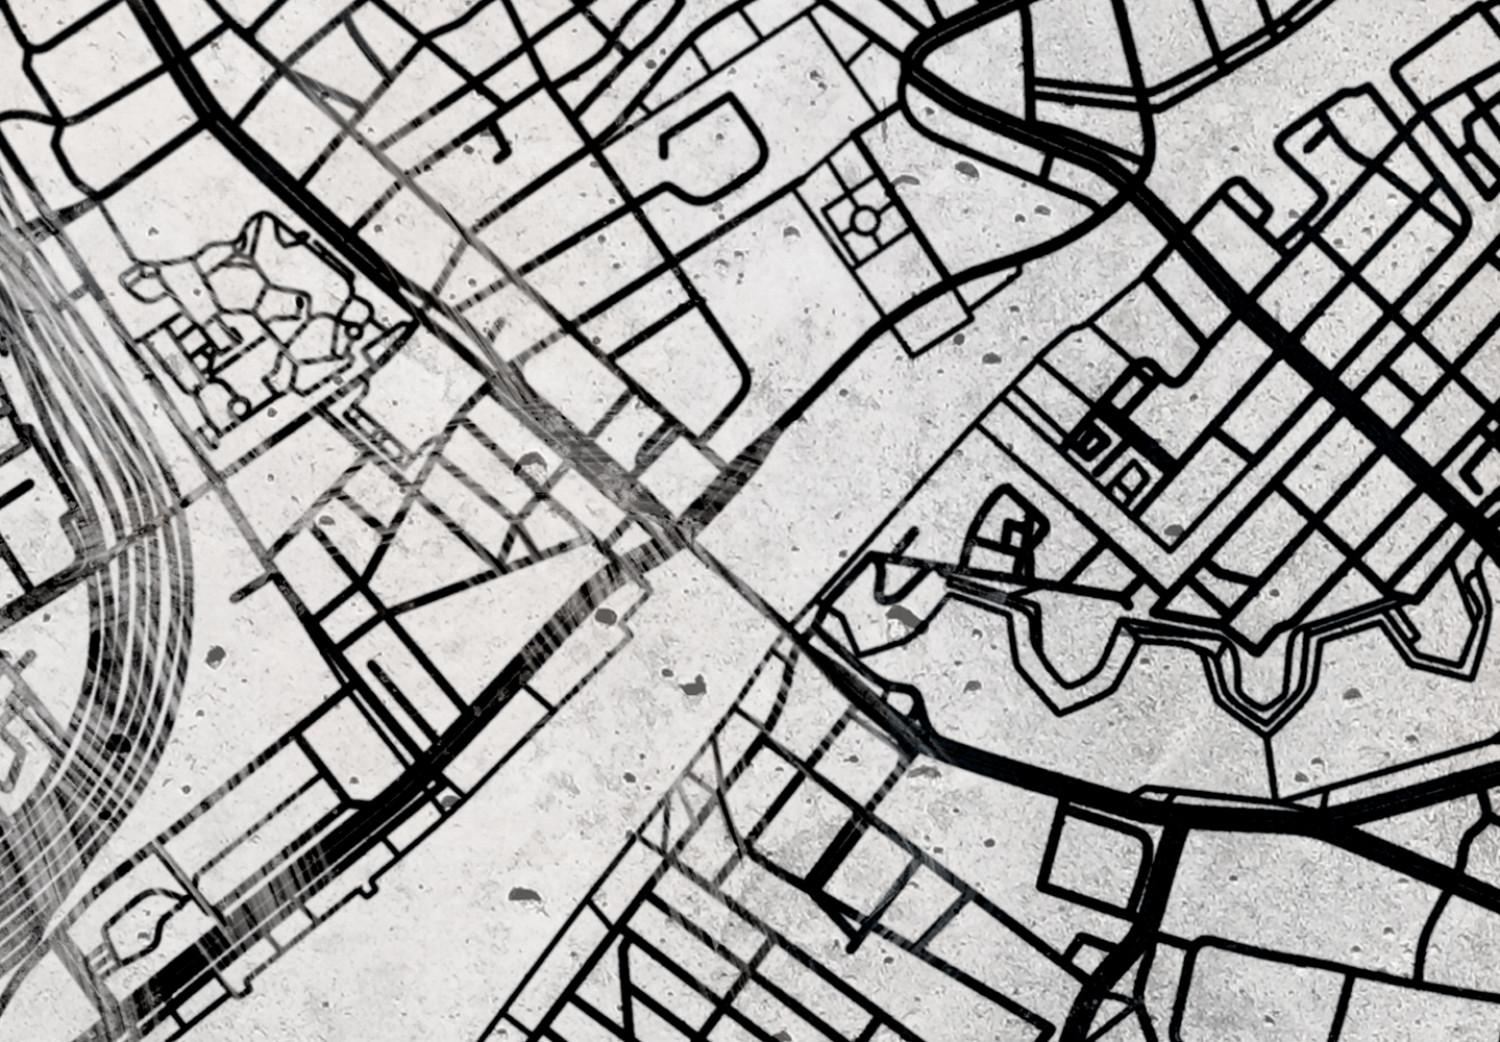 Canvas Map of Copenhagen - Plan of the Denmark Capital in black and white